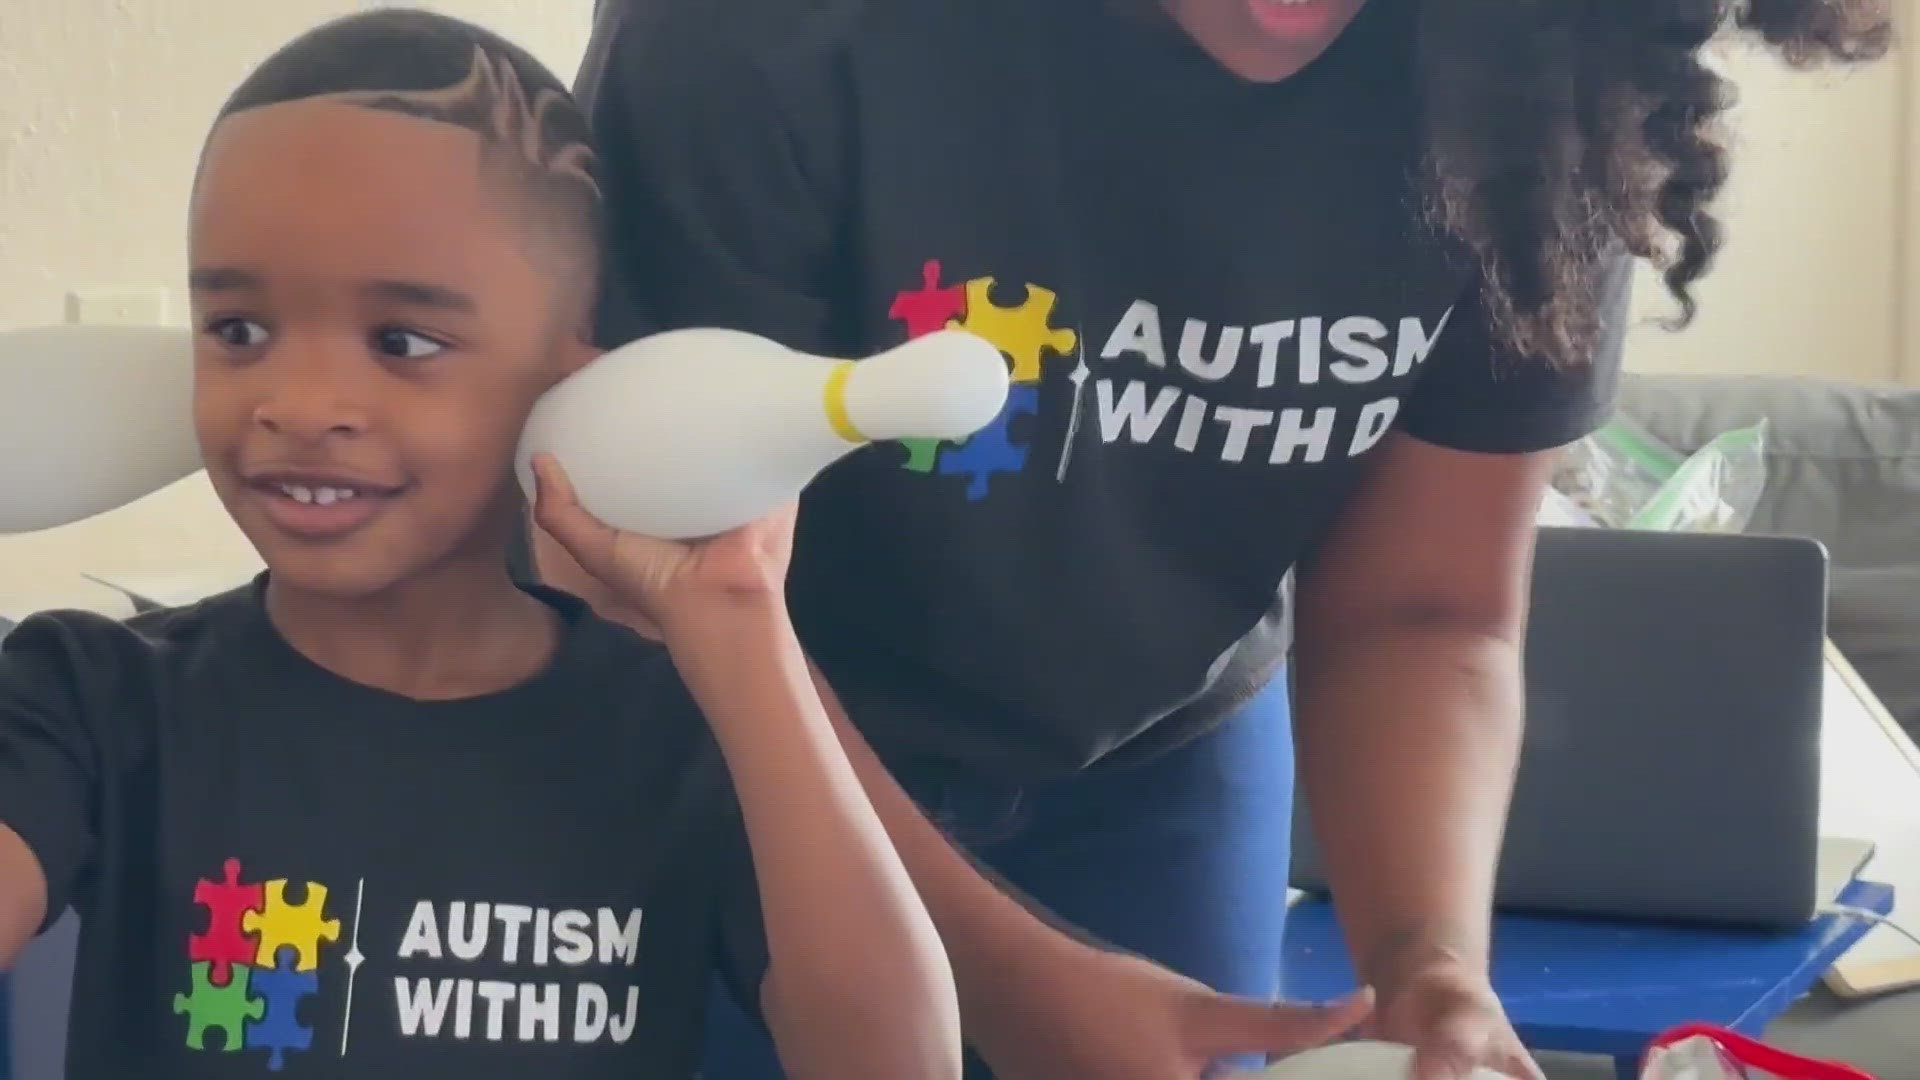 "The feeling was so overwhelming", said the Stockton mom who is going viral while getting rid of the stigma surrounding autism.